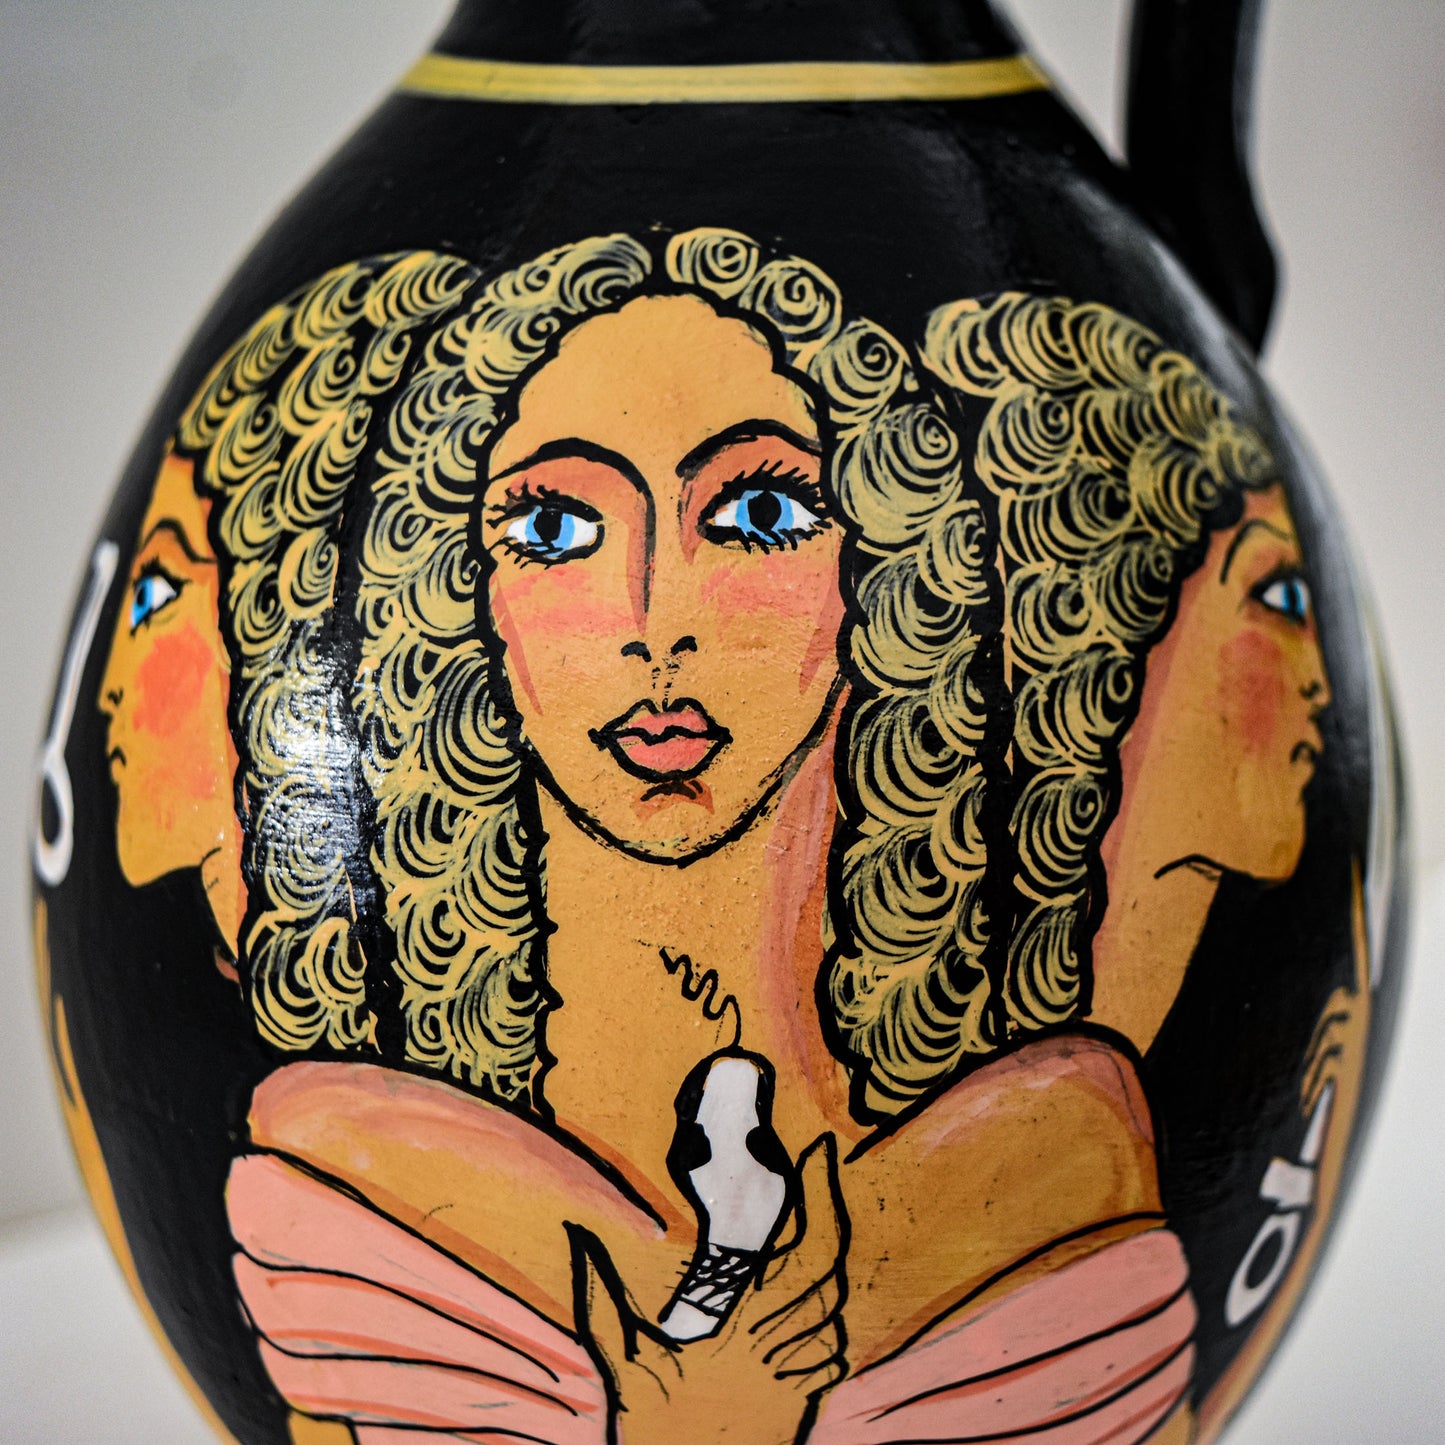 Goddess Hecate Hekate - Crossroads, Night, Magic, Witchcraft, Herbs and poisonous Plants, Ghosts, Necromancy, Sorcery - Ceramic Vase